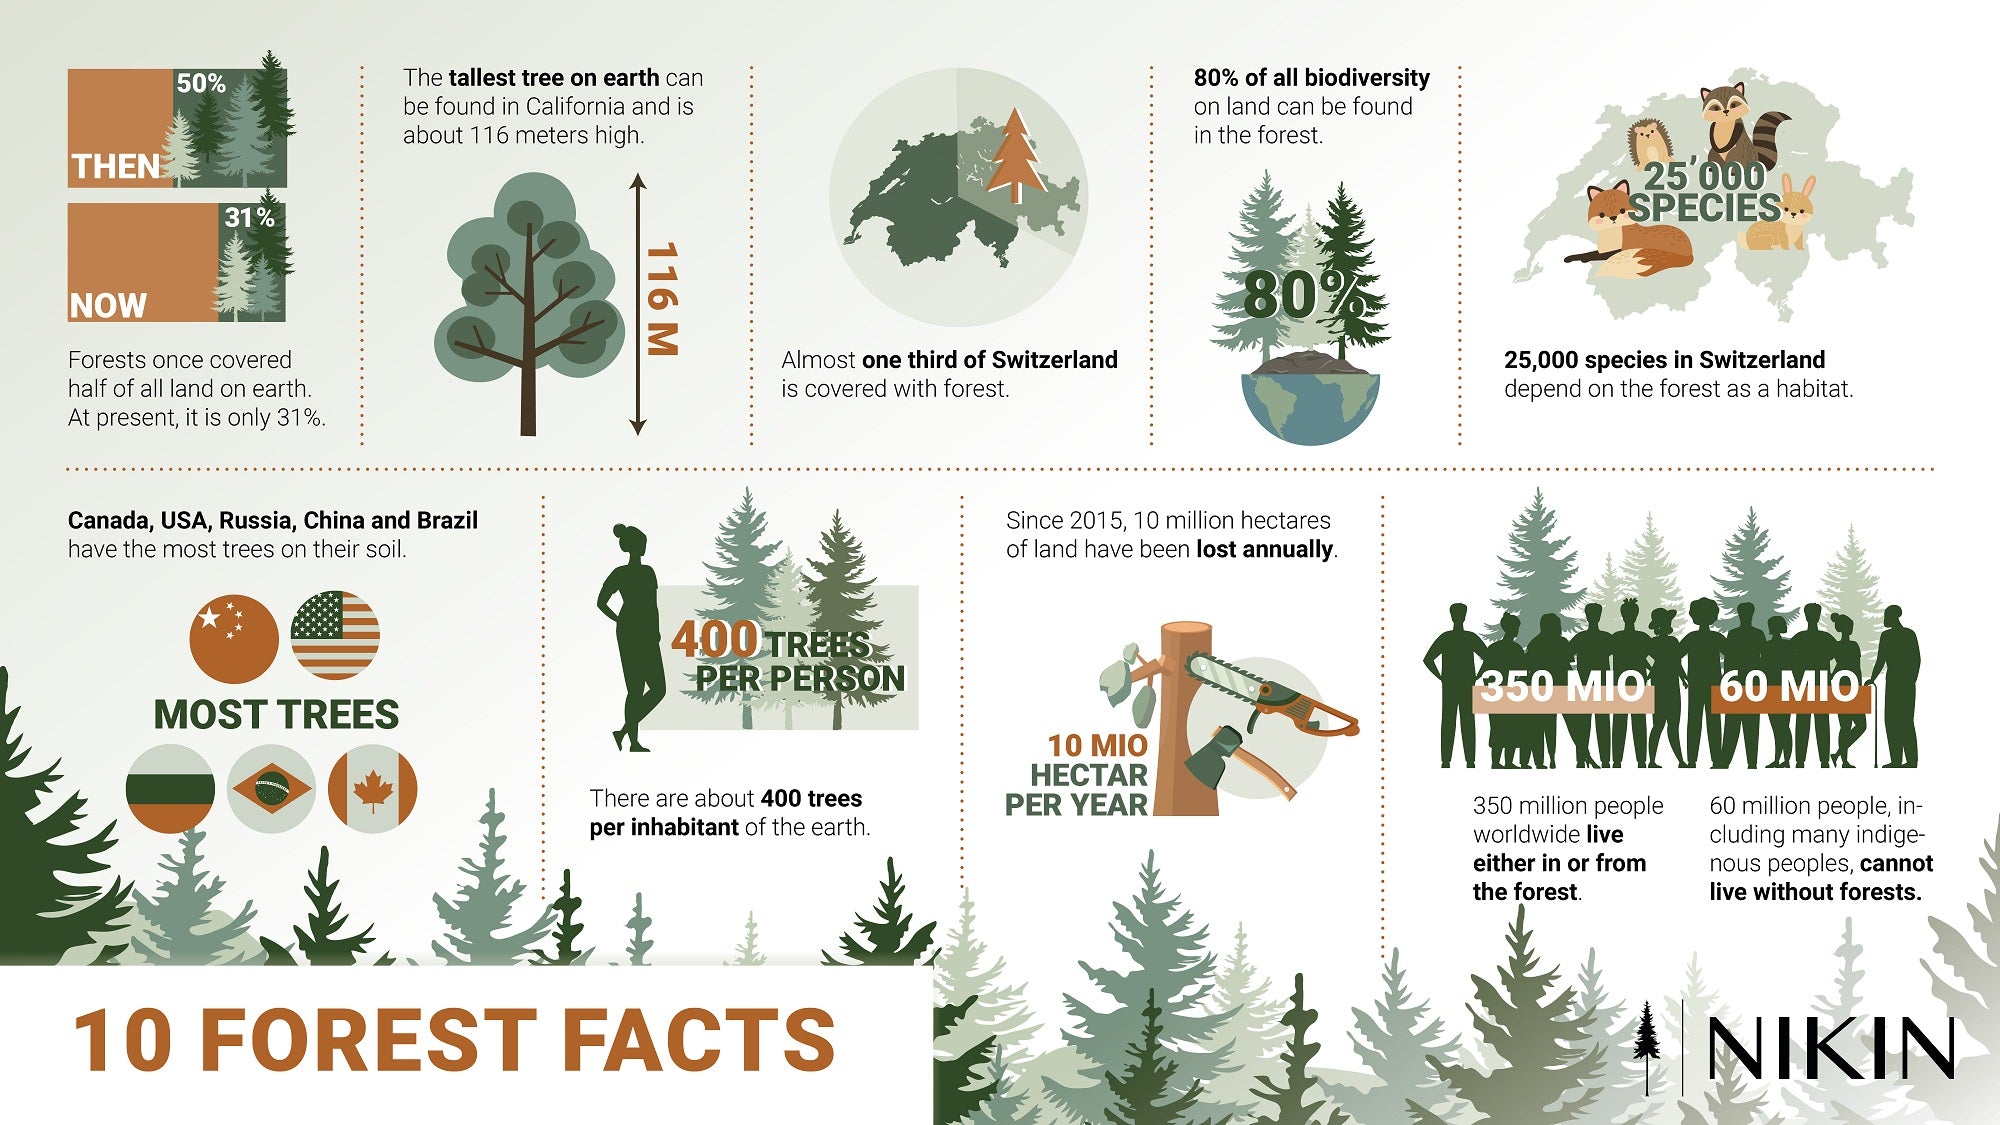 10 Forest Facts